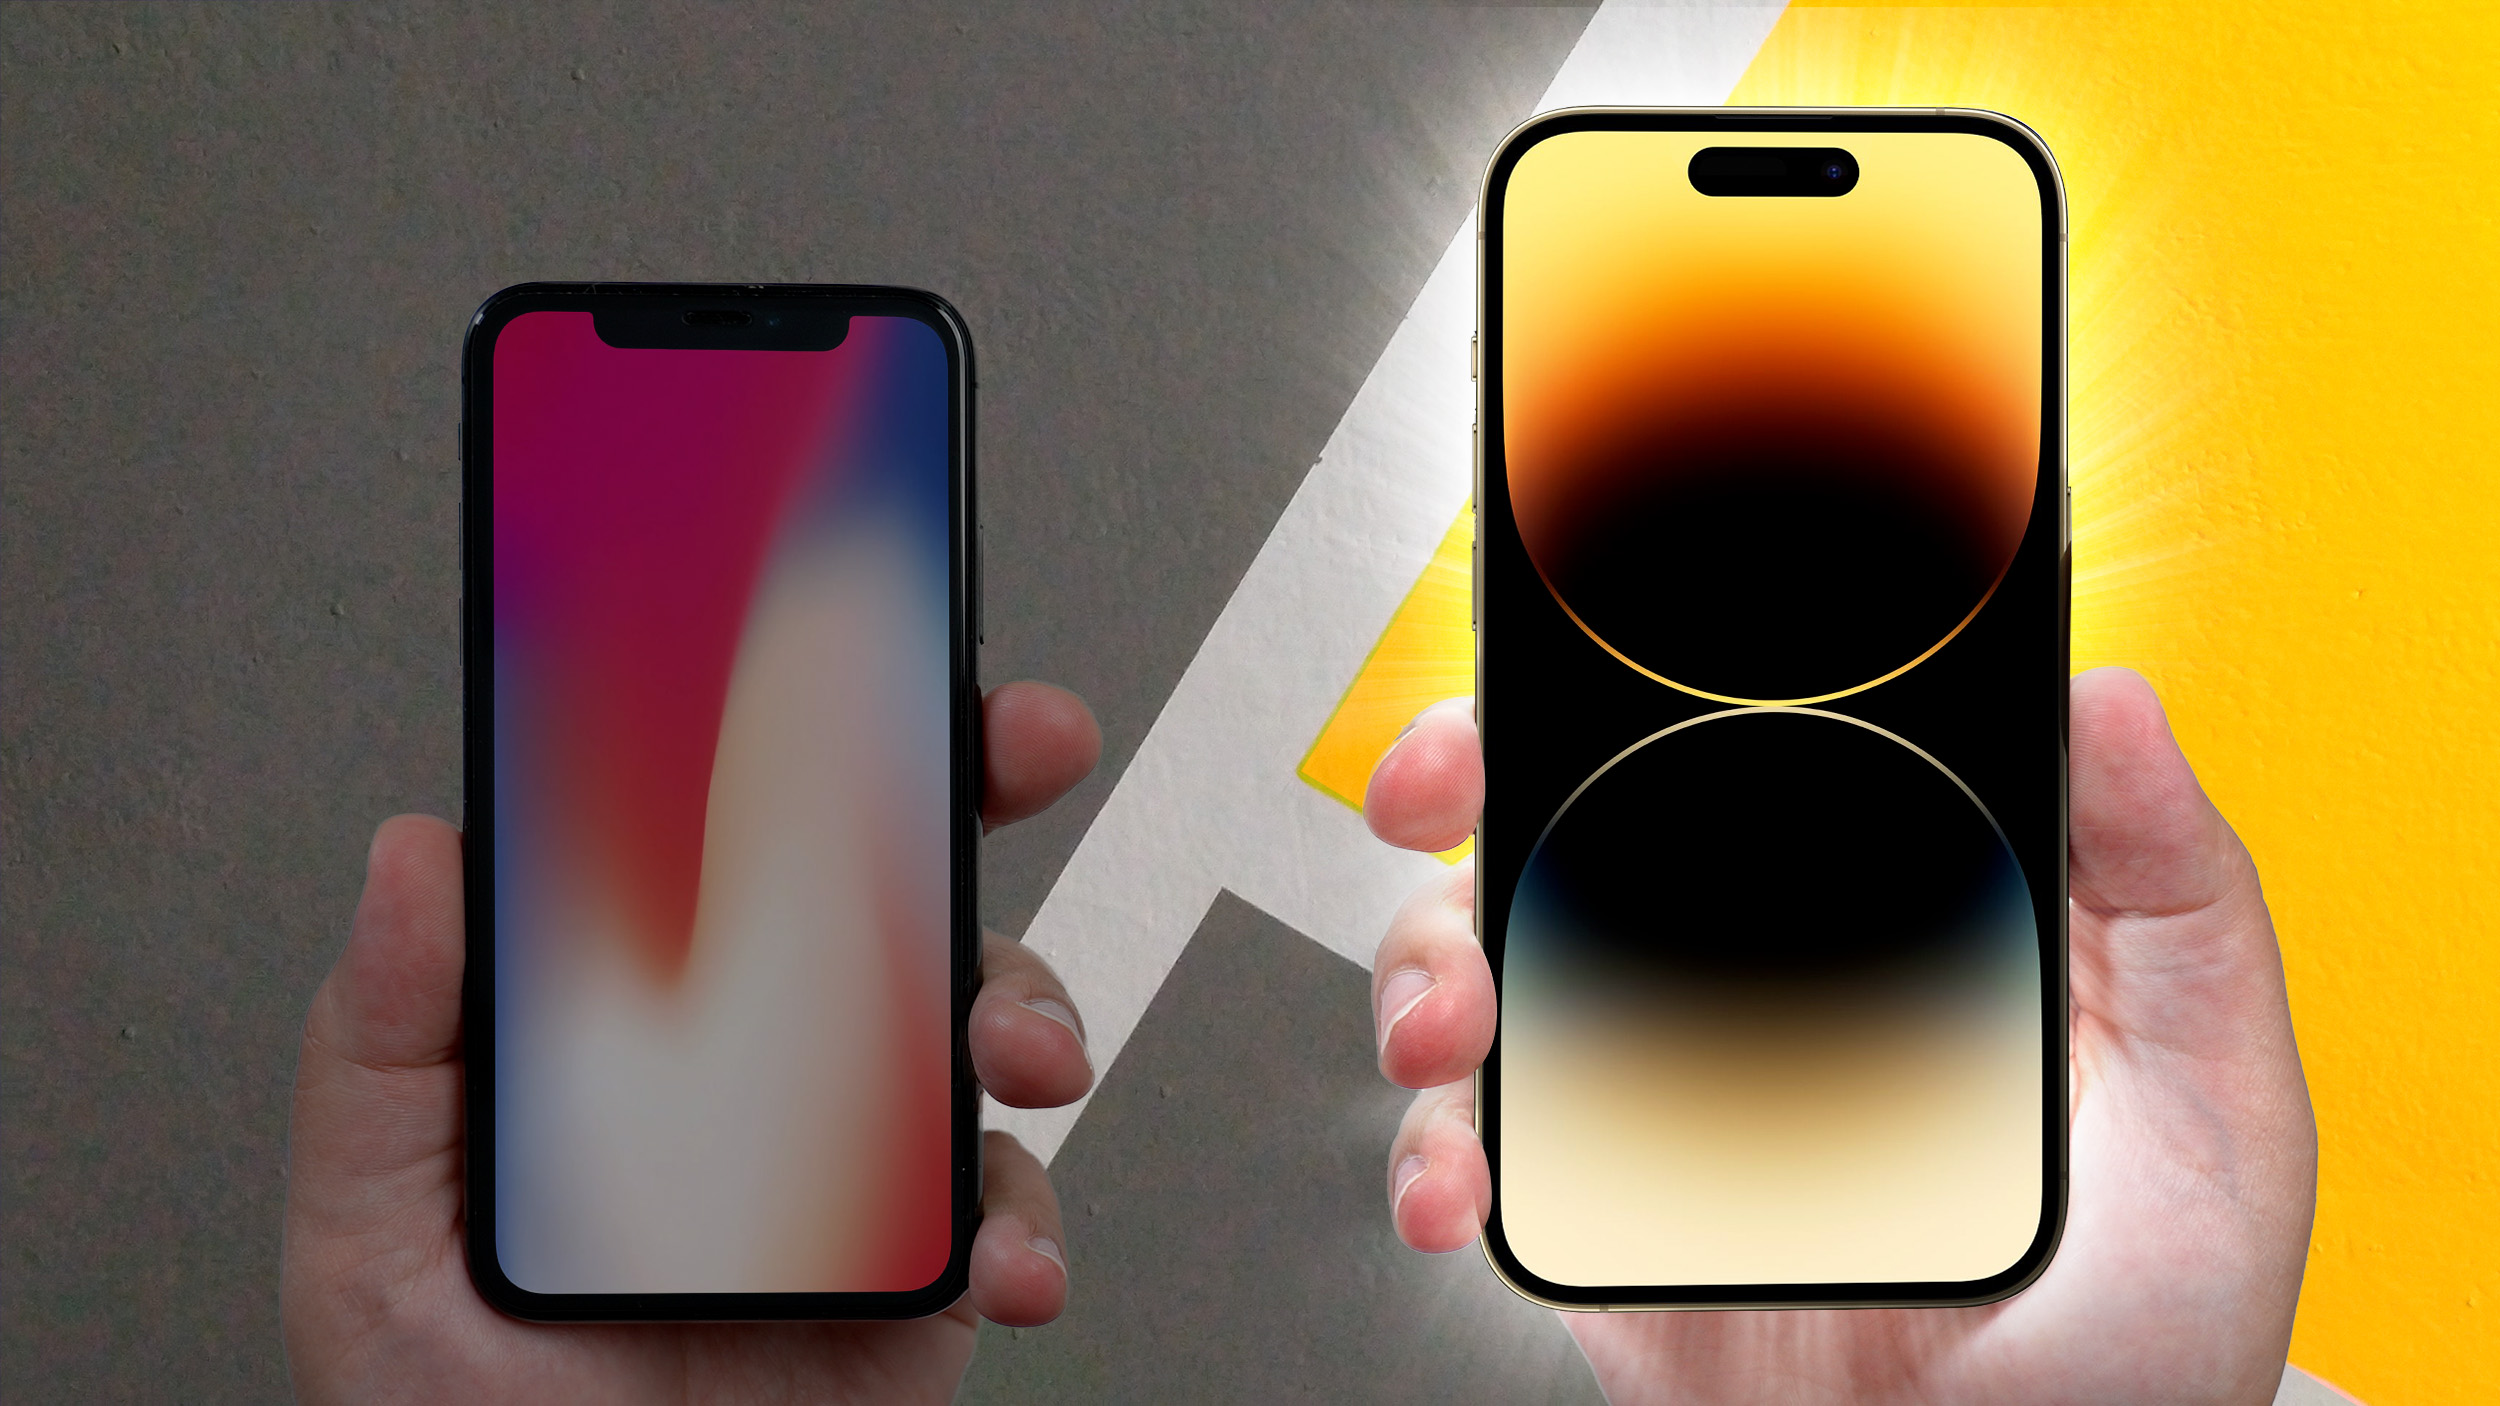 The iPhone X still does one thing better than the iPhone 14 Pro